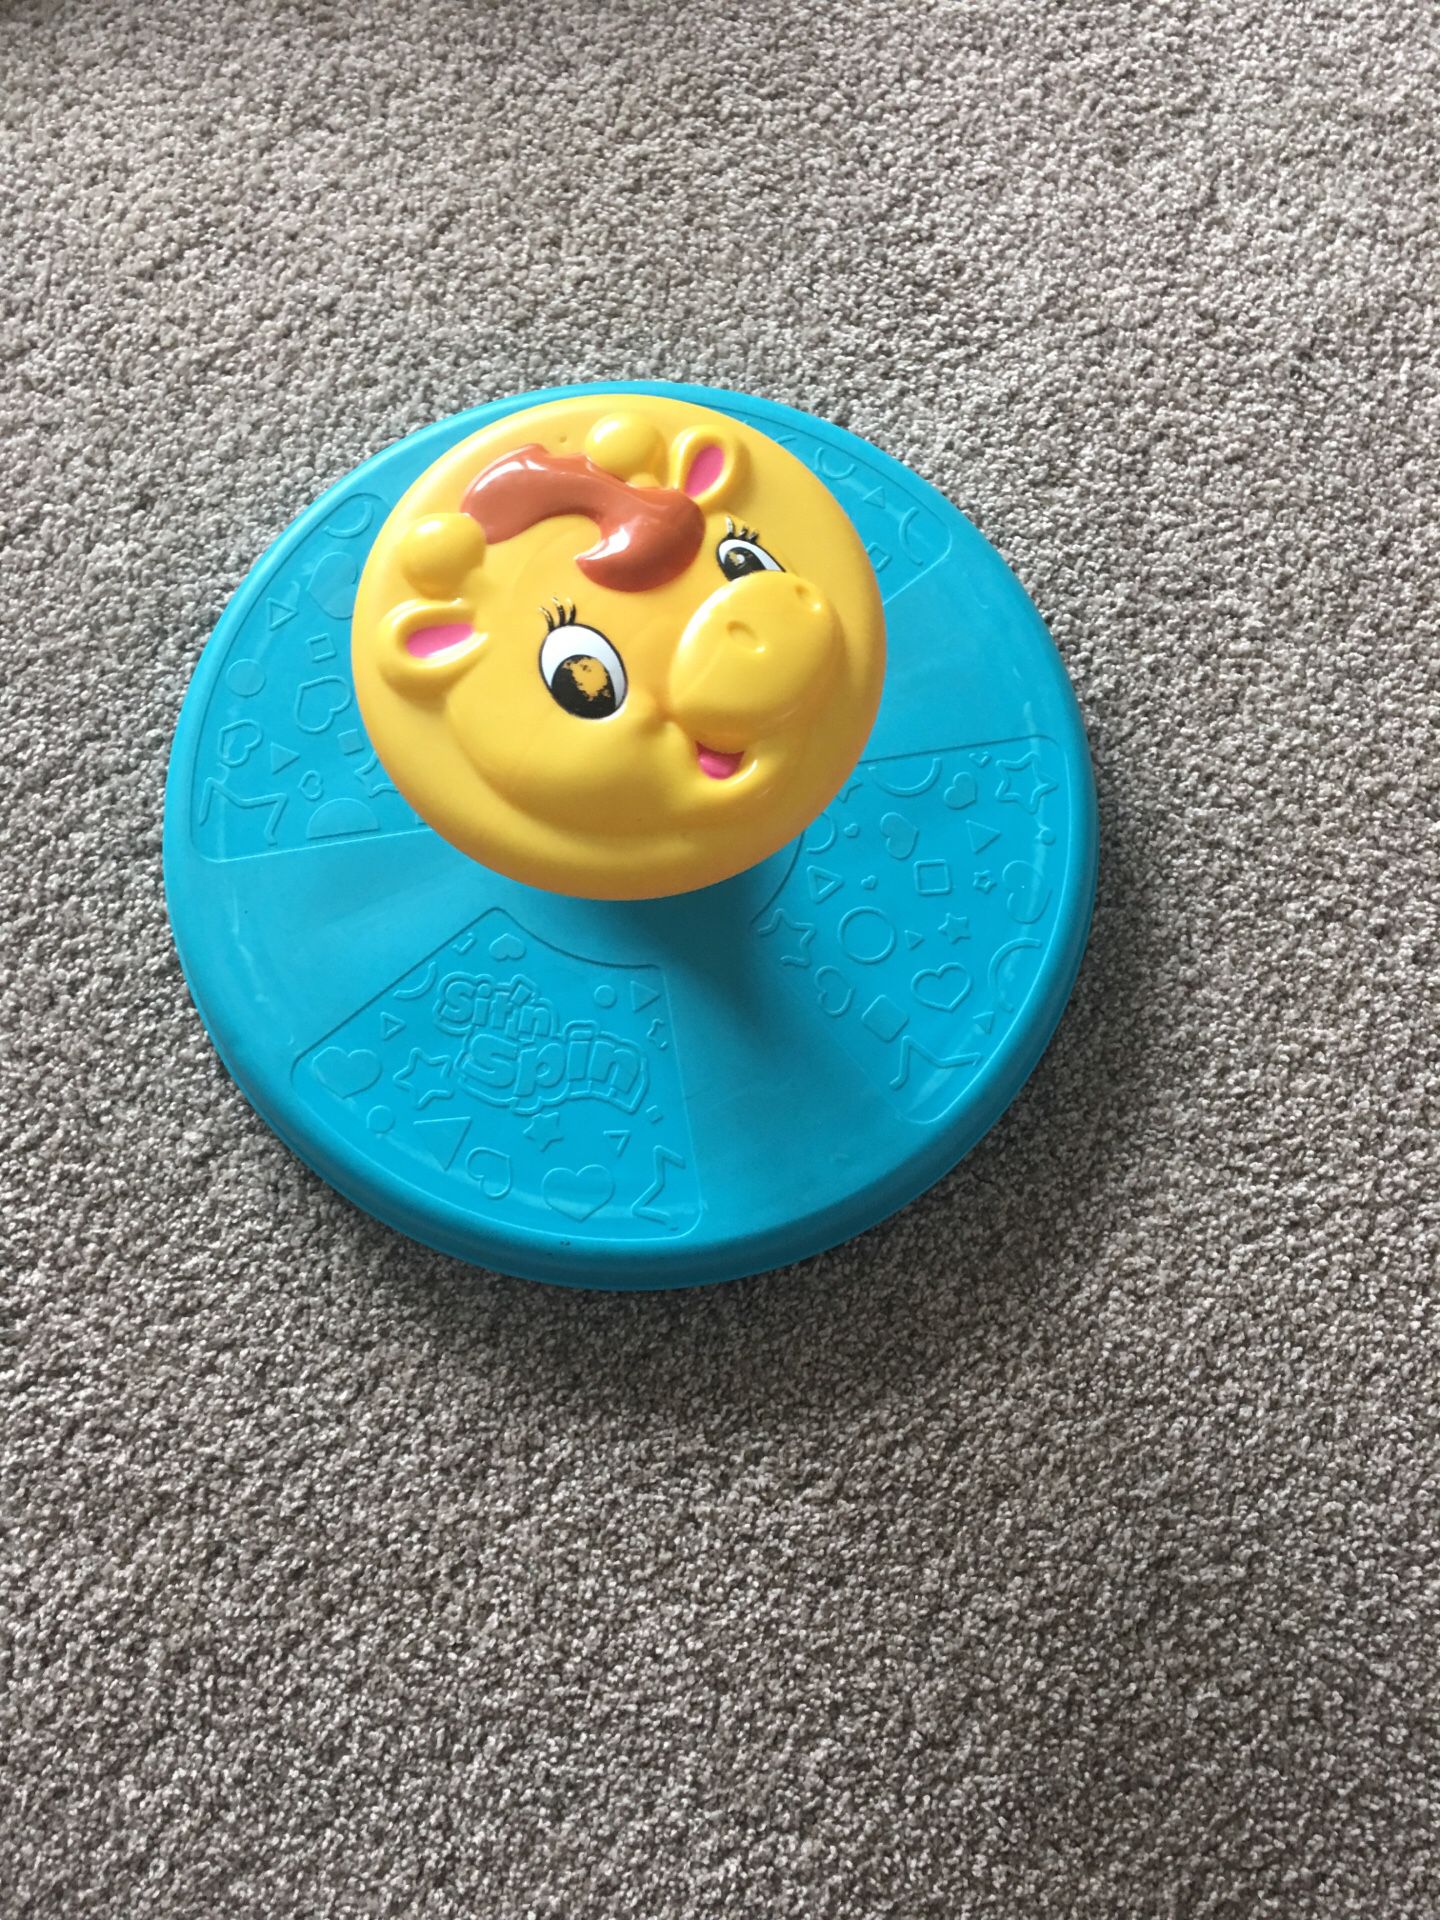 Sit and spin toy